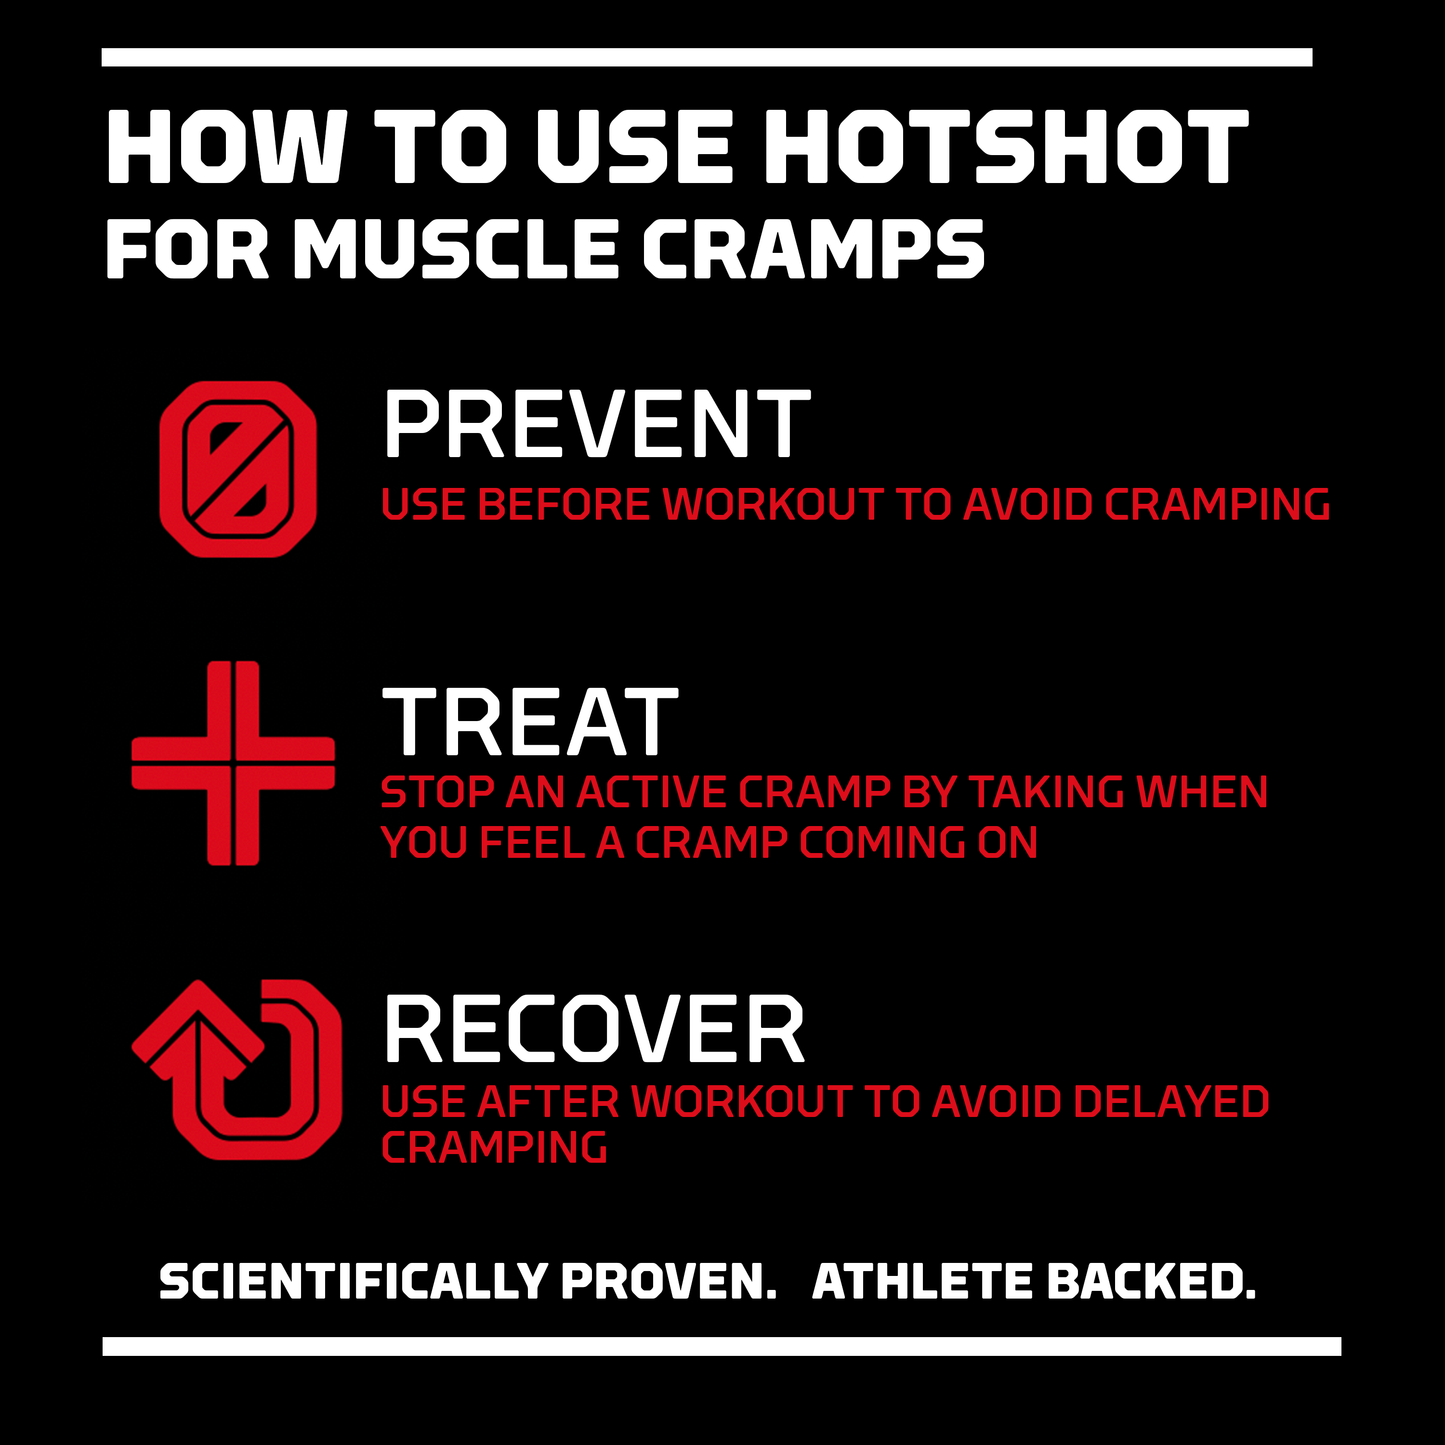 How To Use HotShot for Muscle Cramps